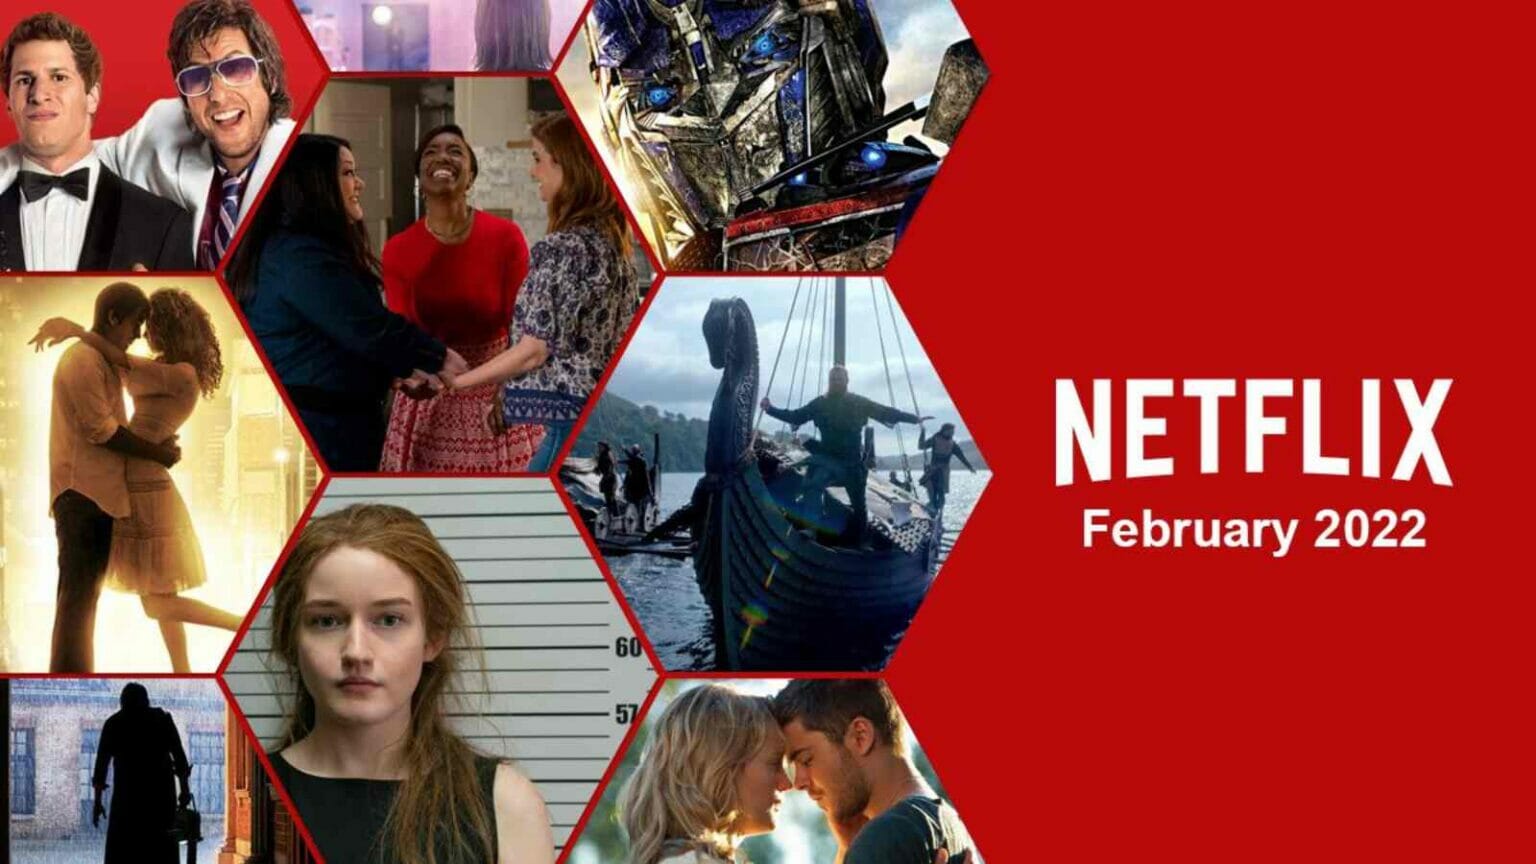 Mustwatch Netflix content releasing this February First Curiosity